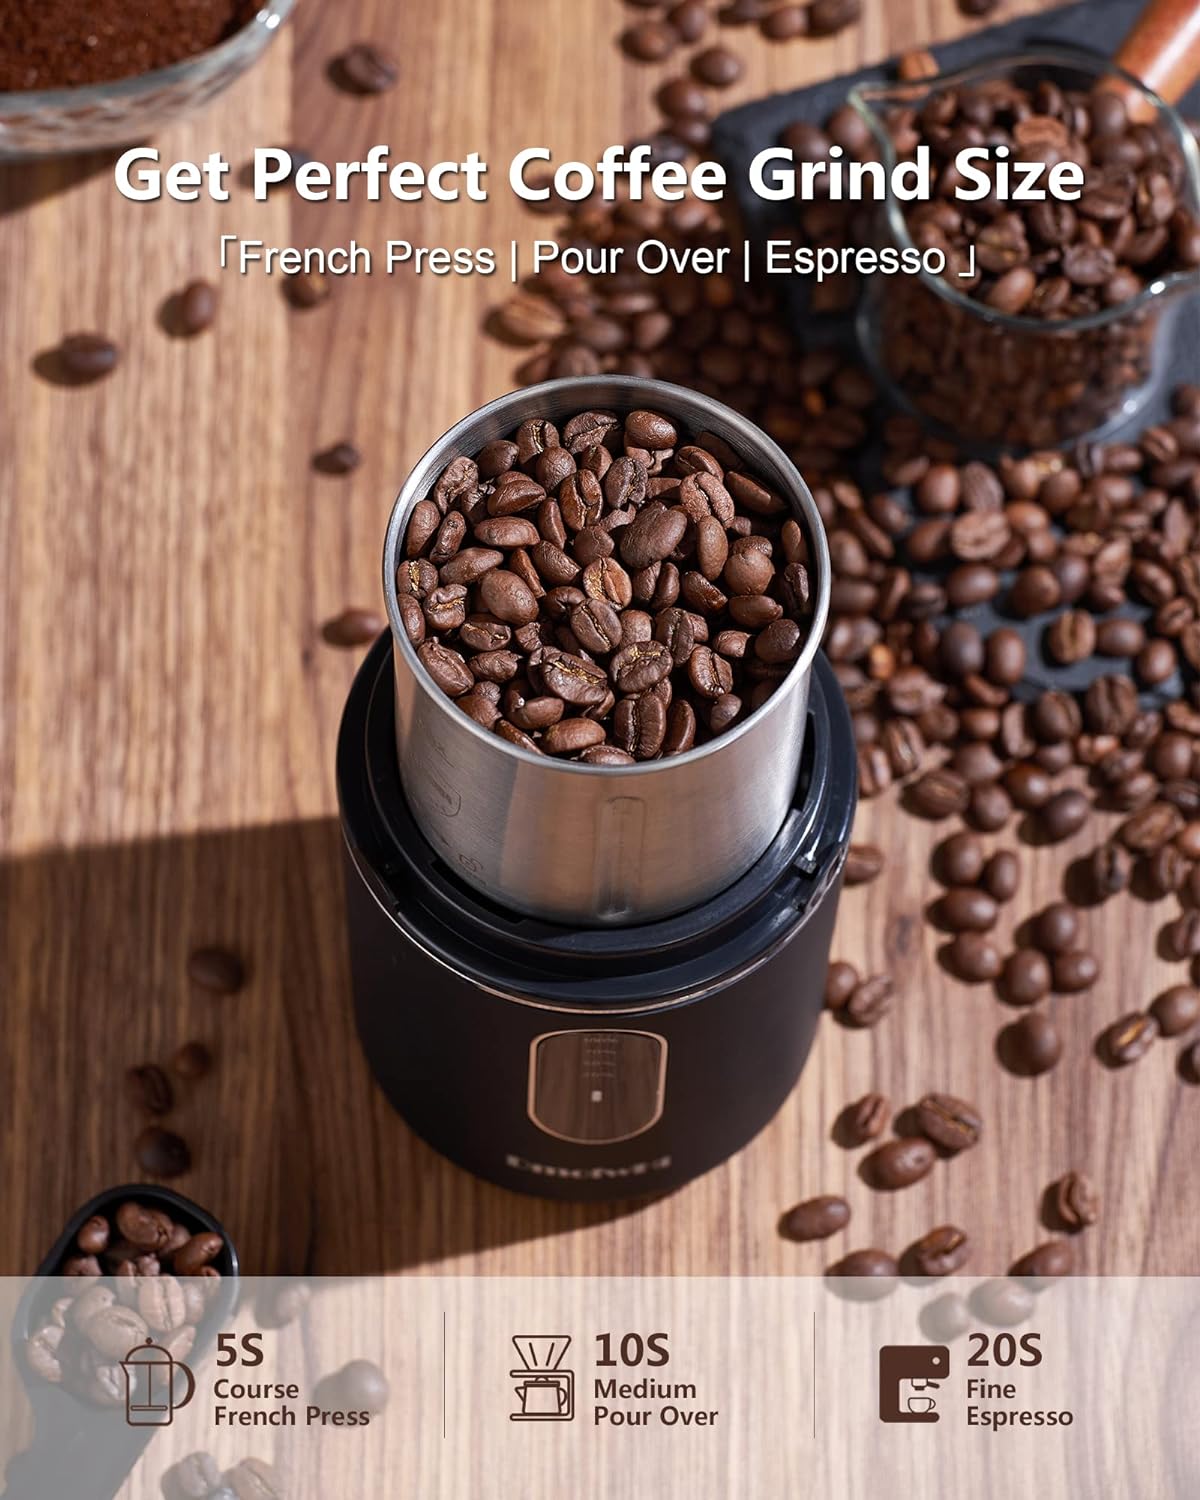 Cordless Coffee Grinder Electric, DmofwHi USB Rechargeable Spice Grinder Electric with 304 Stainless Steel Blade and Removable Bowl, French Grind Coffee Bean Grinder for Spices and Seeds-Black